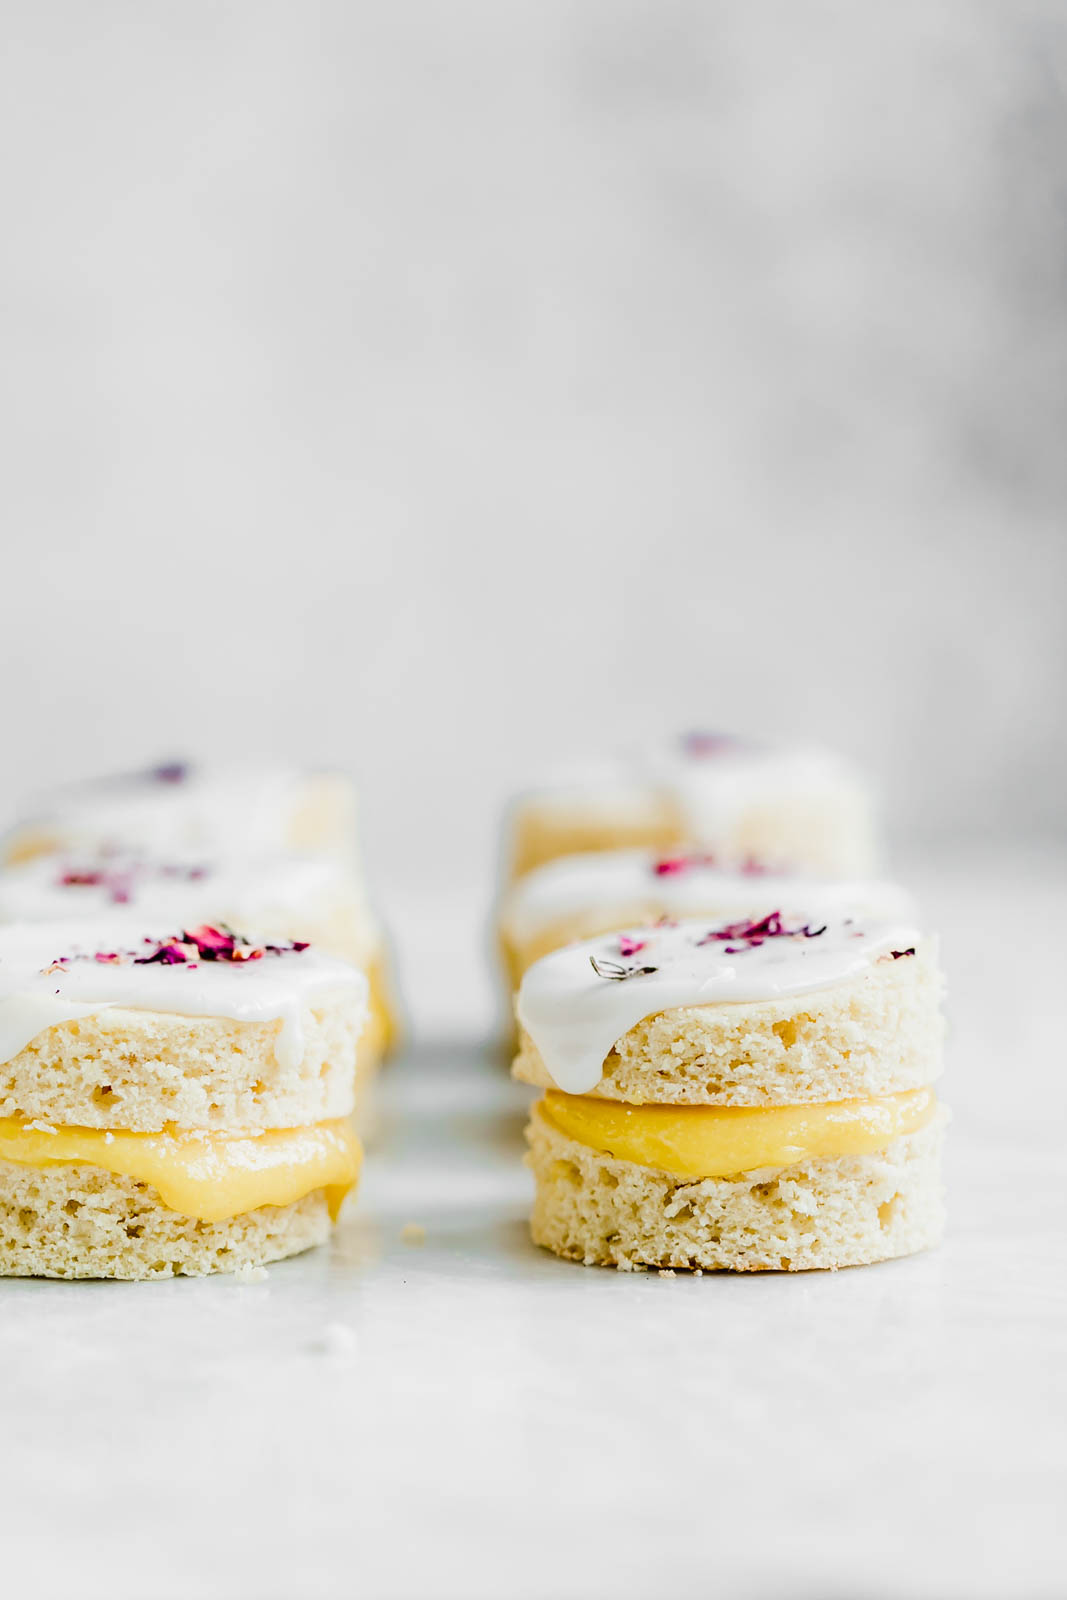 Coconut Lemon Curd Petit Fours: homemade lemon curd sandwiched between two coconut flour cakes and topped with lemon icing. HELLO SPRING!